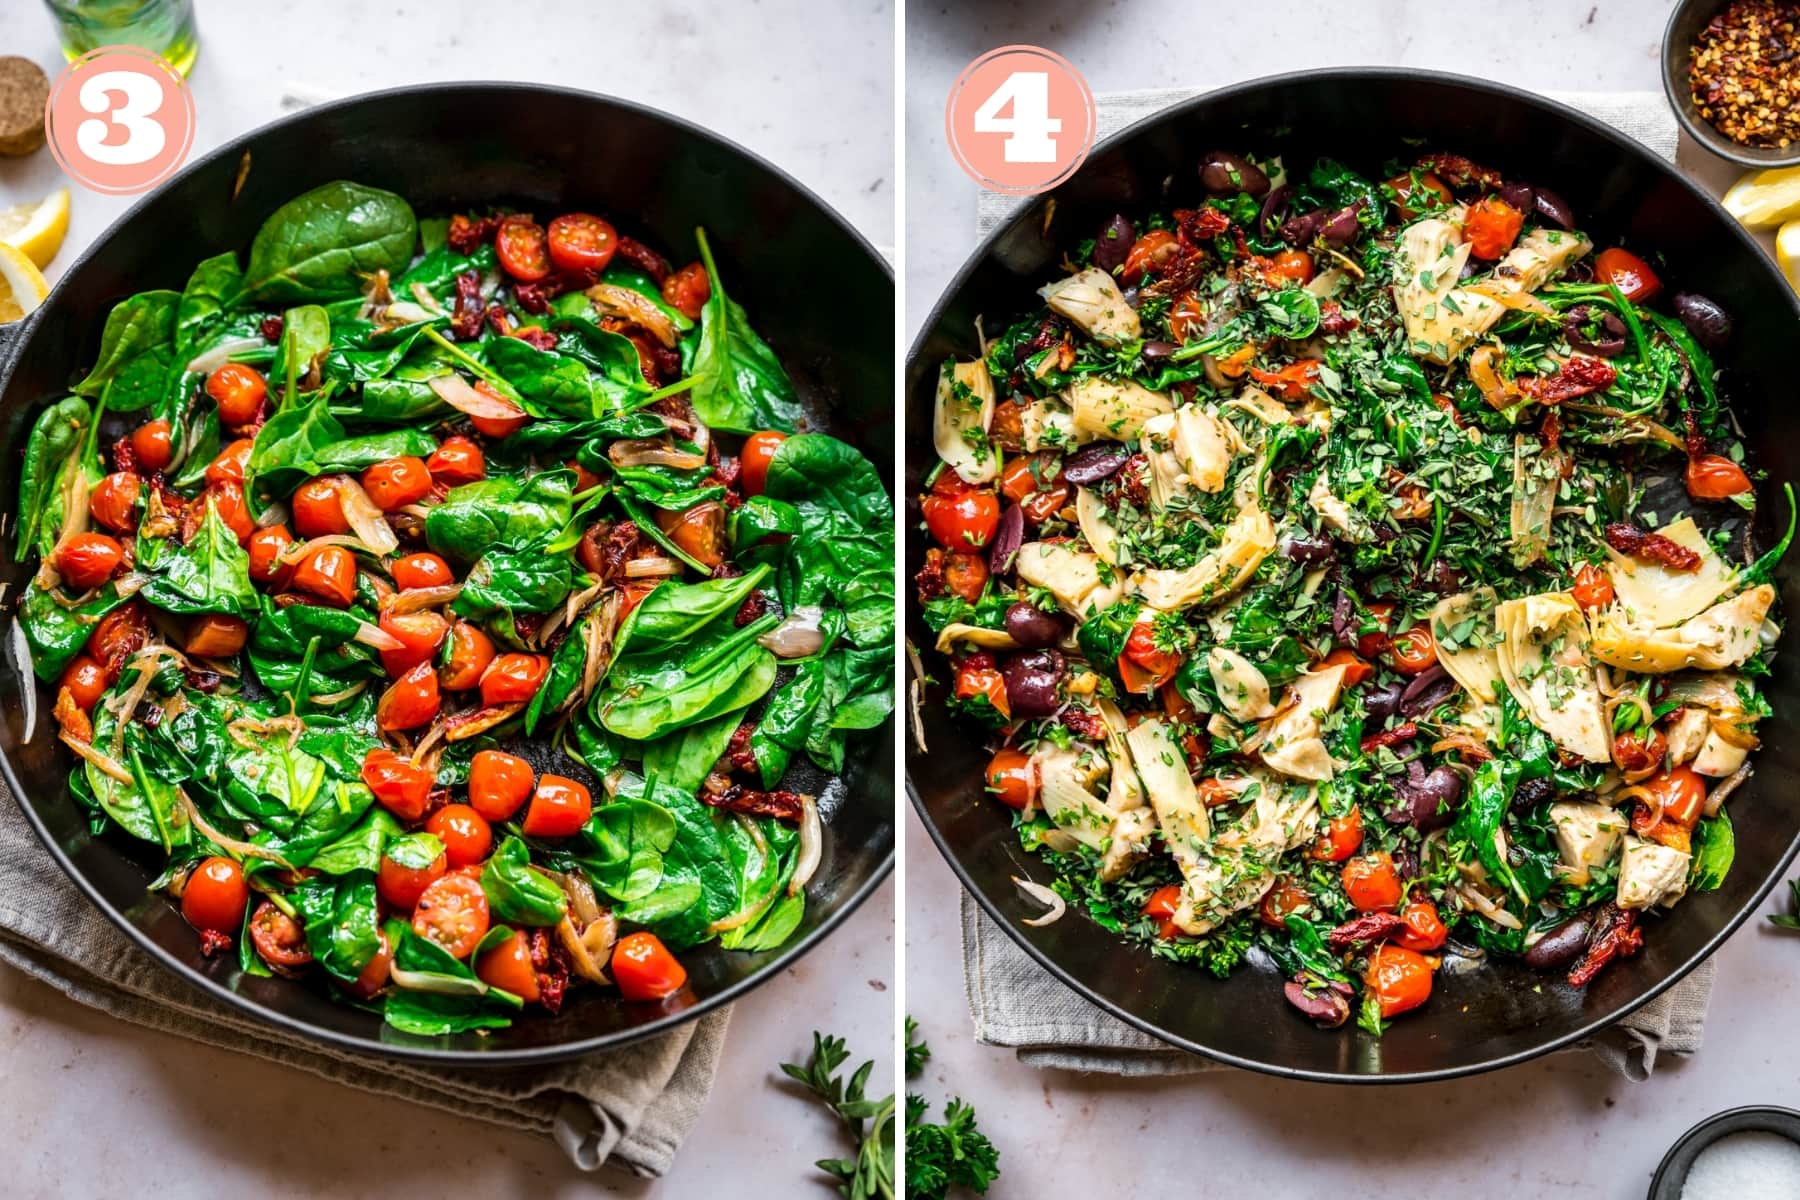 on the left: sautéed spinach and tomatoes. on the right: sautéed ingredients for greek pasta.